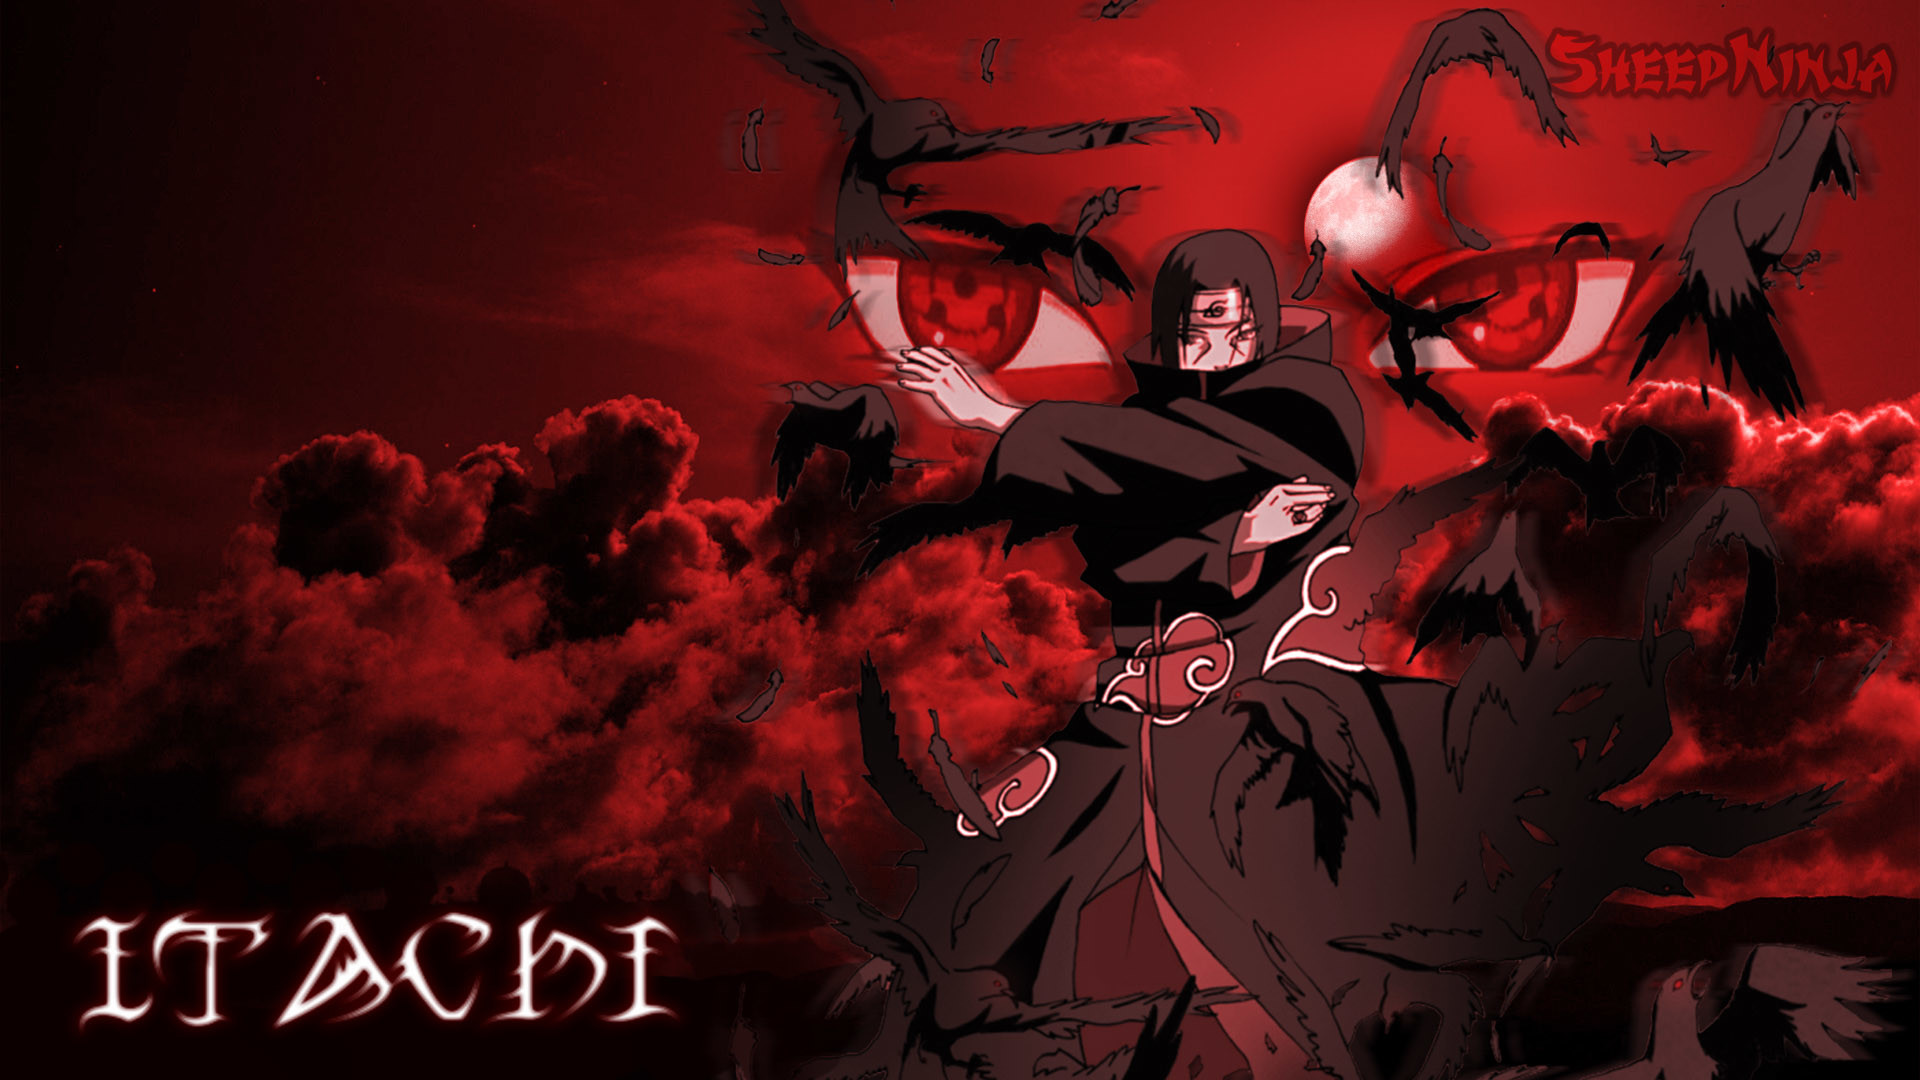 1920x1080 Backgrounds In High Quality - Itachi by Iikka Dunster